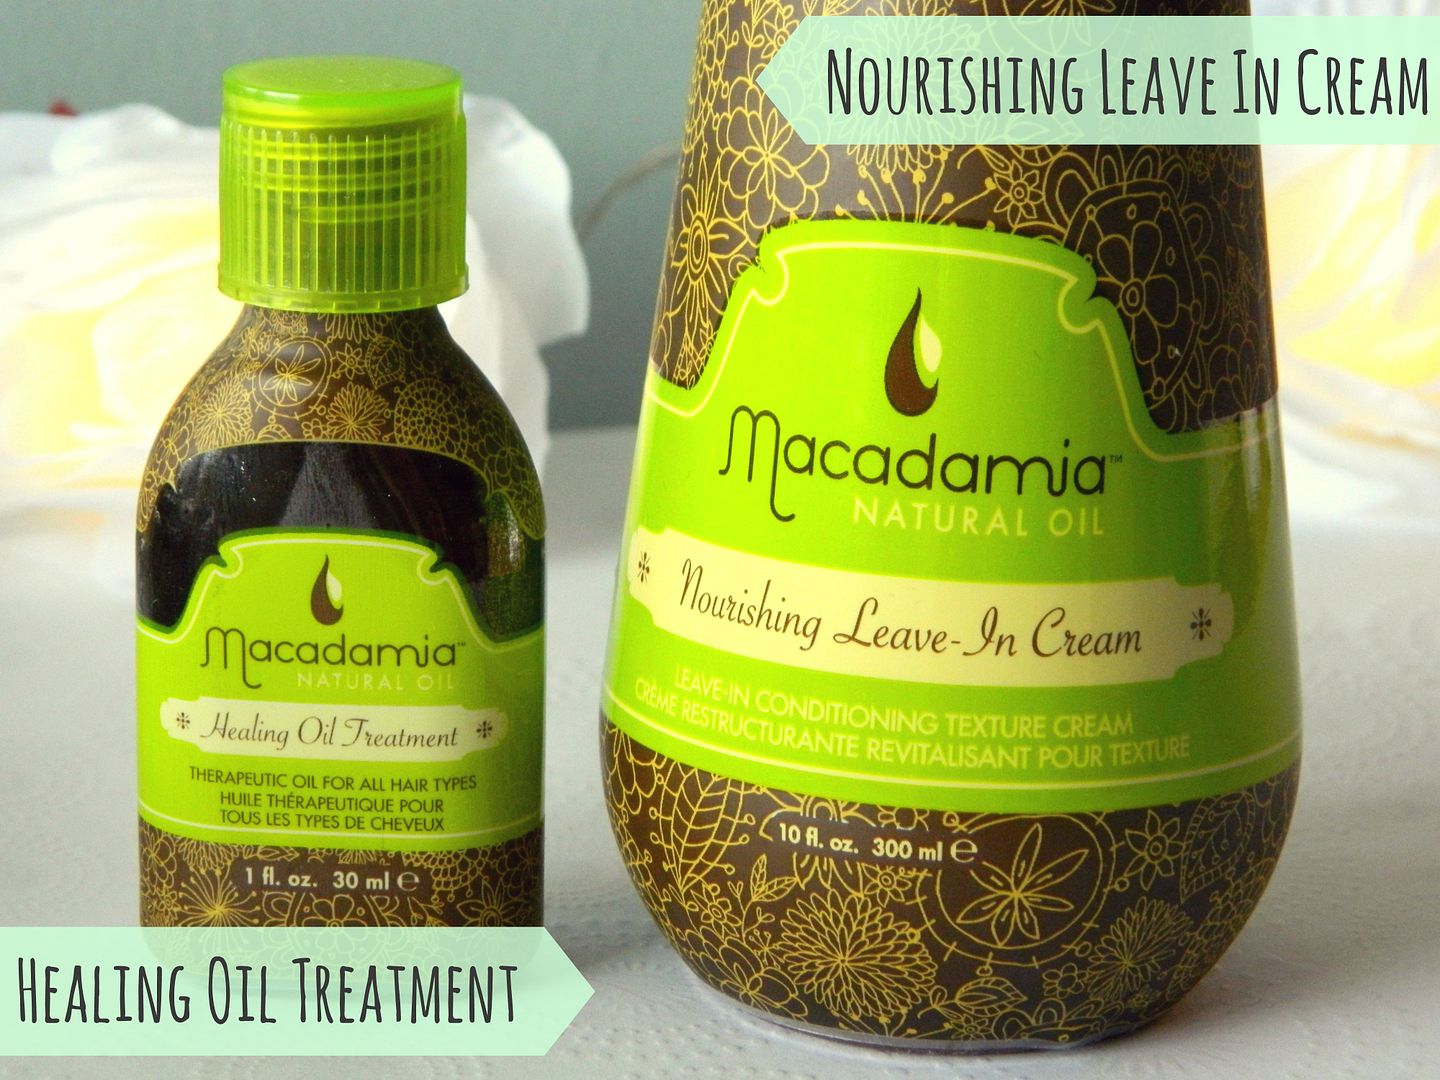 Macadamia Natural Oil Nourishing Leave In Cream healing Oil Treatment Packaging Review Belle-amie